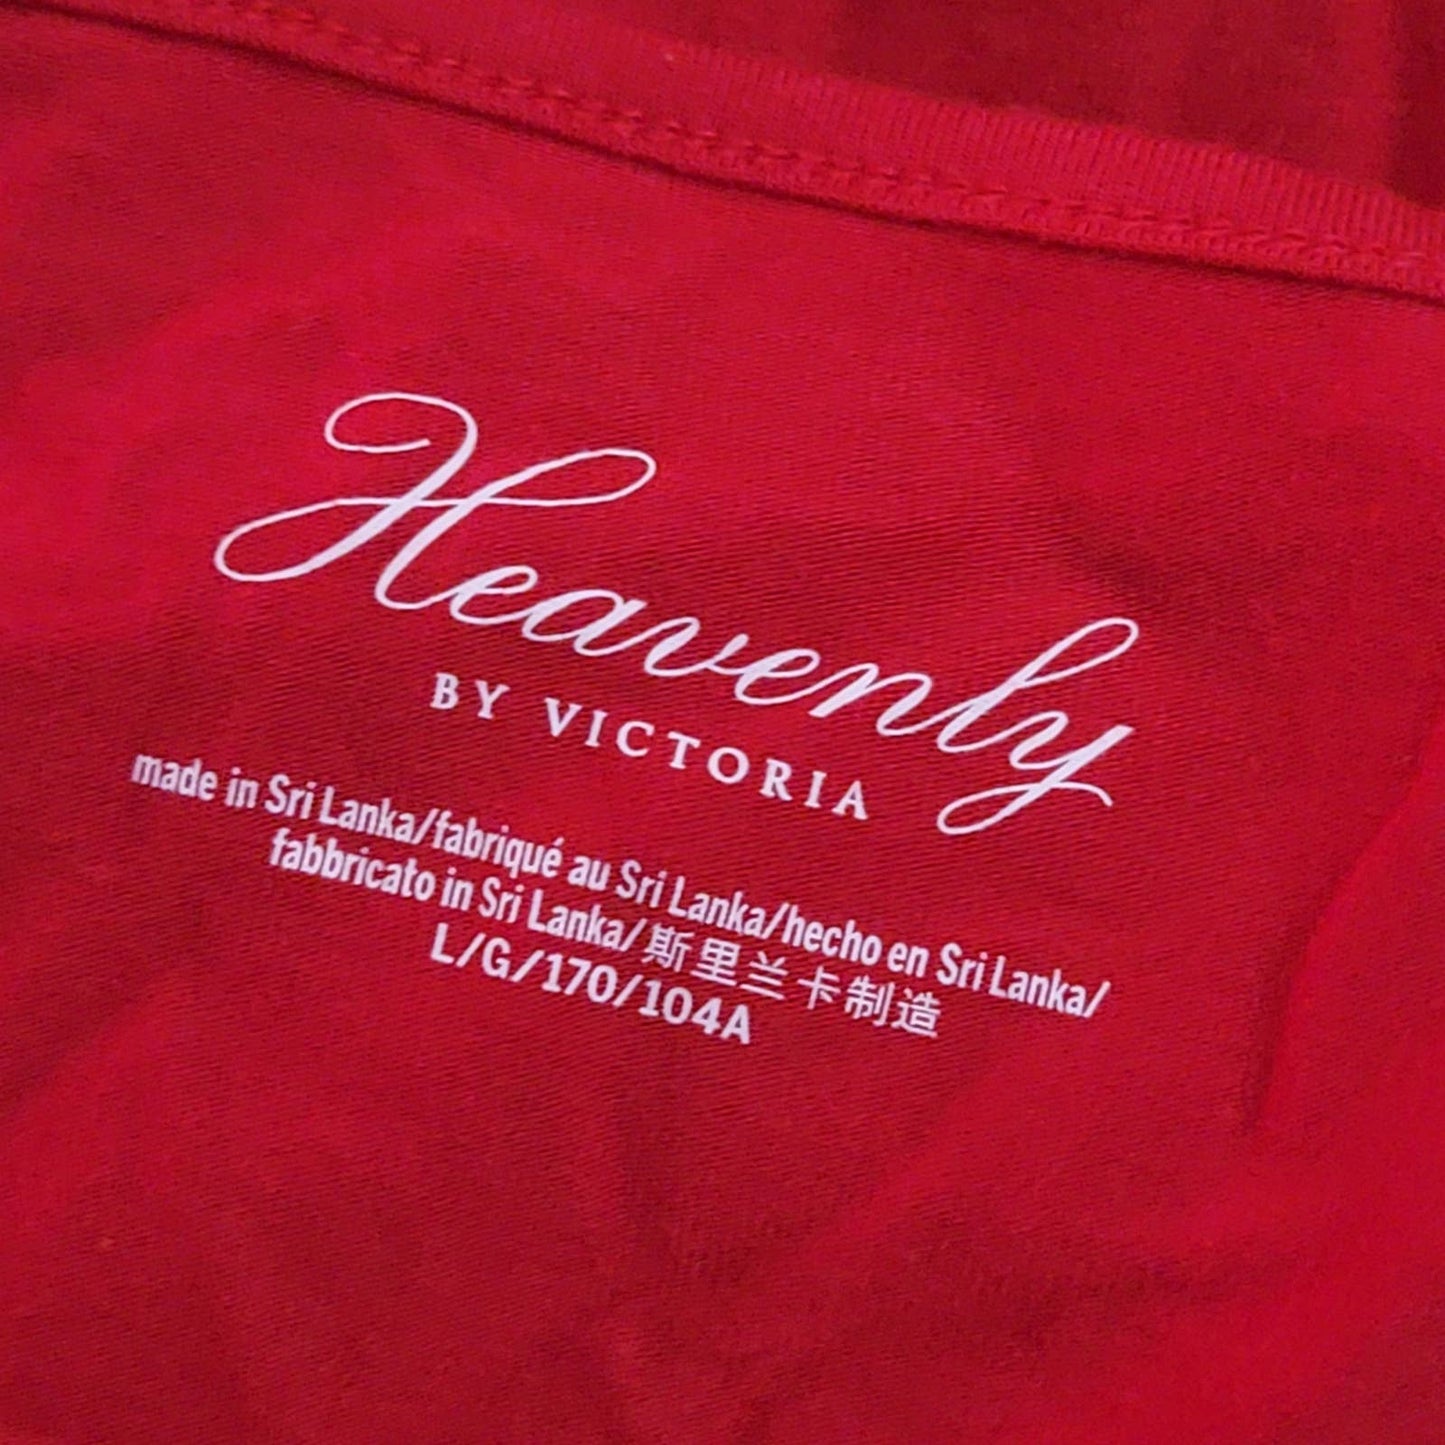 Heavenly by Victoria's Secret Red Camisole Tank Top